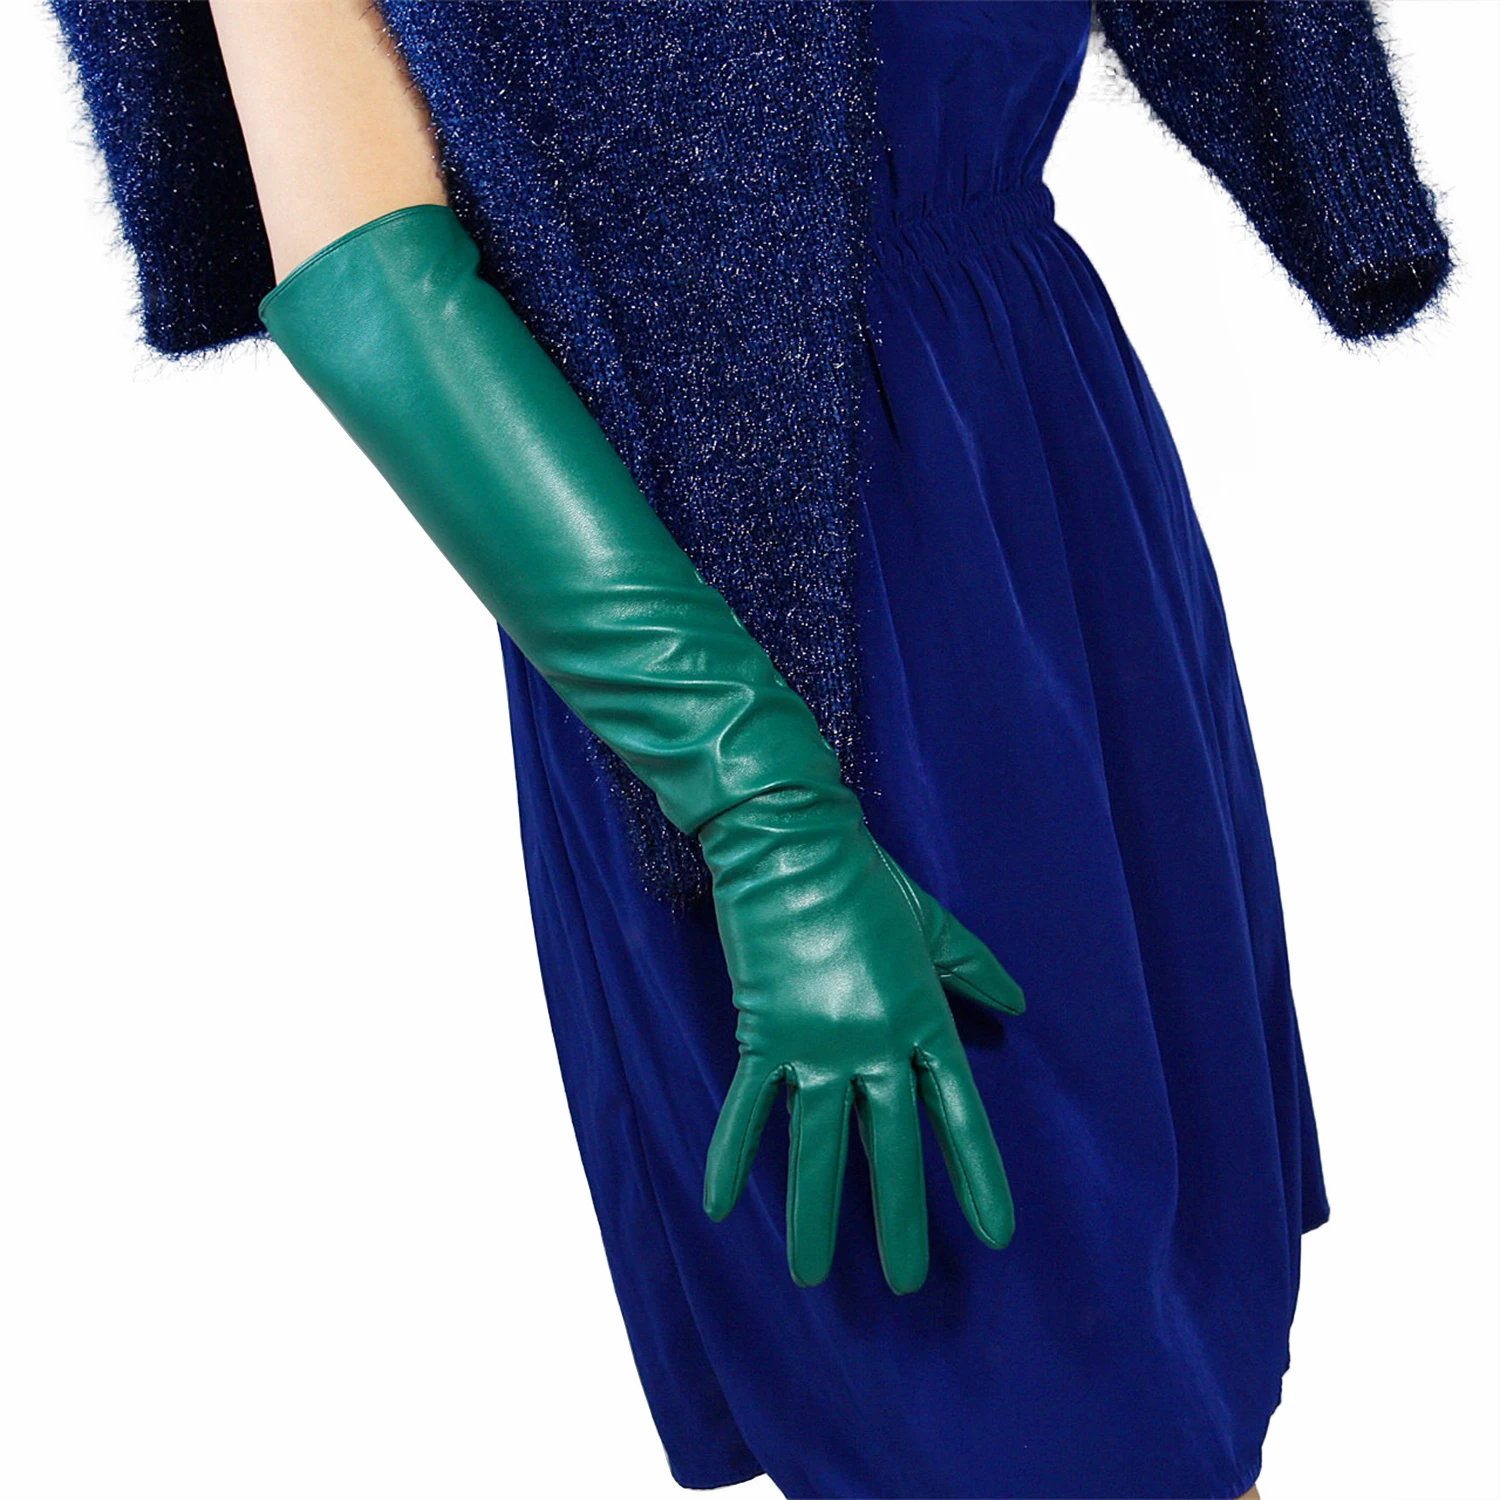 

DooWay Women's Dark Green Opera Gloves Forest Color Faux Leather Elbow Dressing Fashion NightClub Party Evening Cosplay Glove